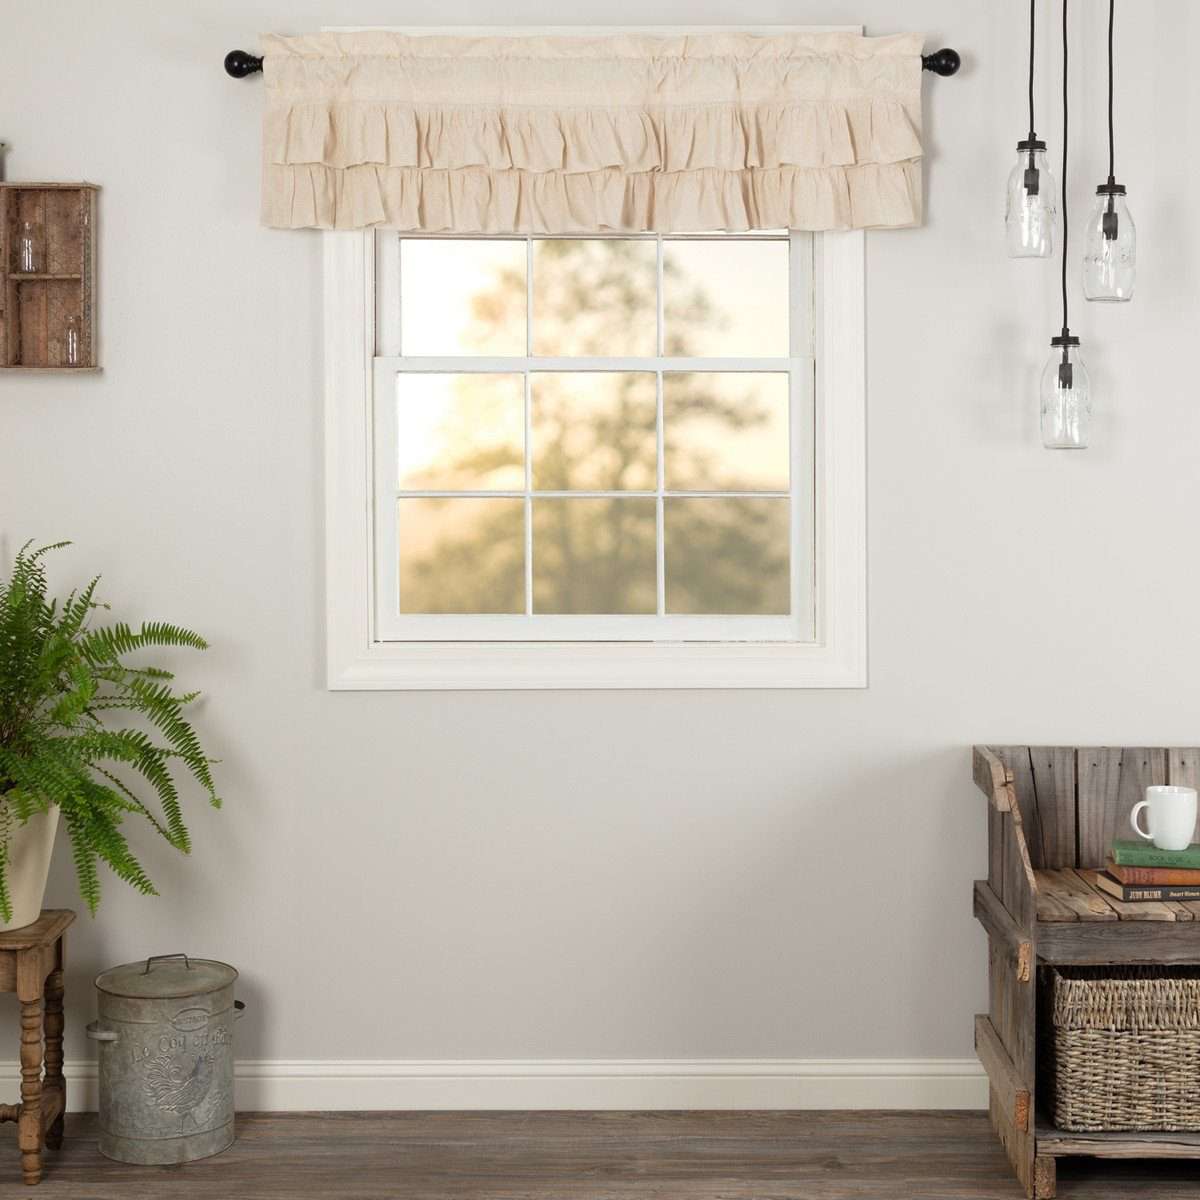 Simple Life Flax Natural Ruffled Valance Curtain VHC Brands - The Fox Decor